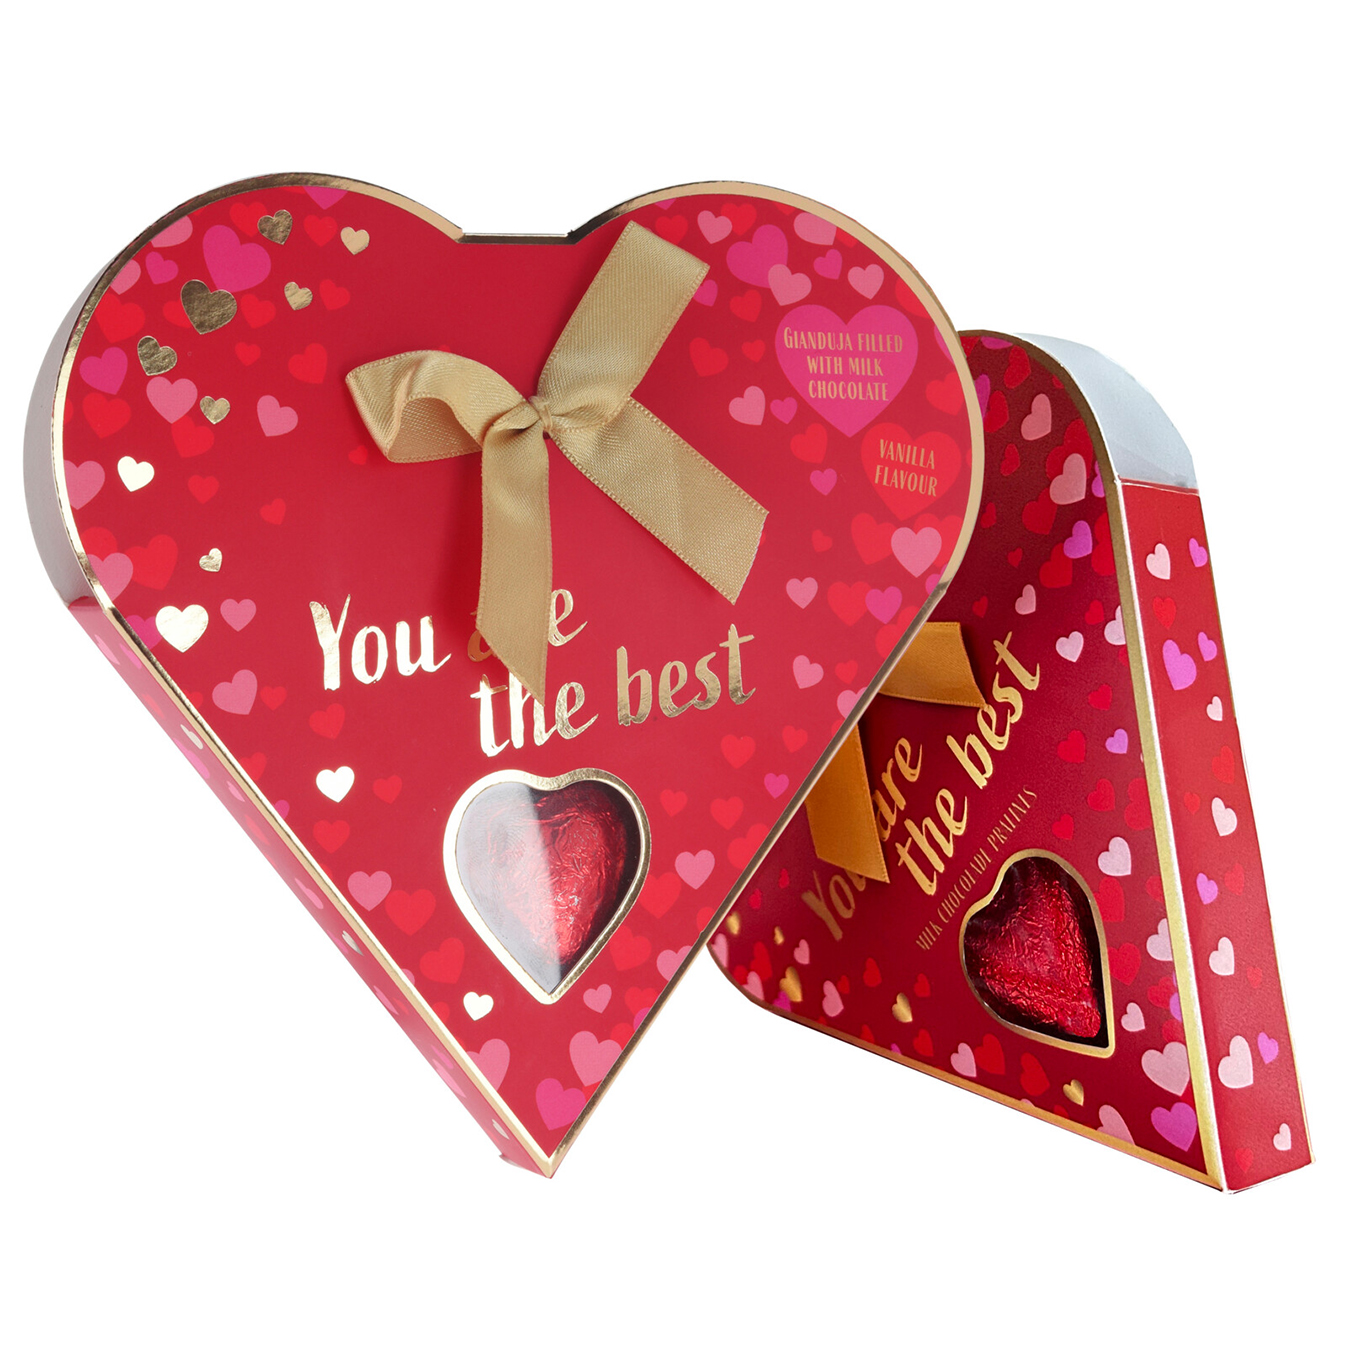 Becky's candies in a heart box 45g